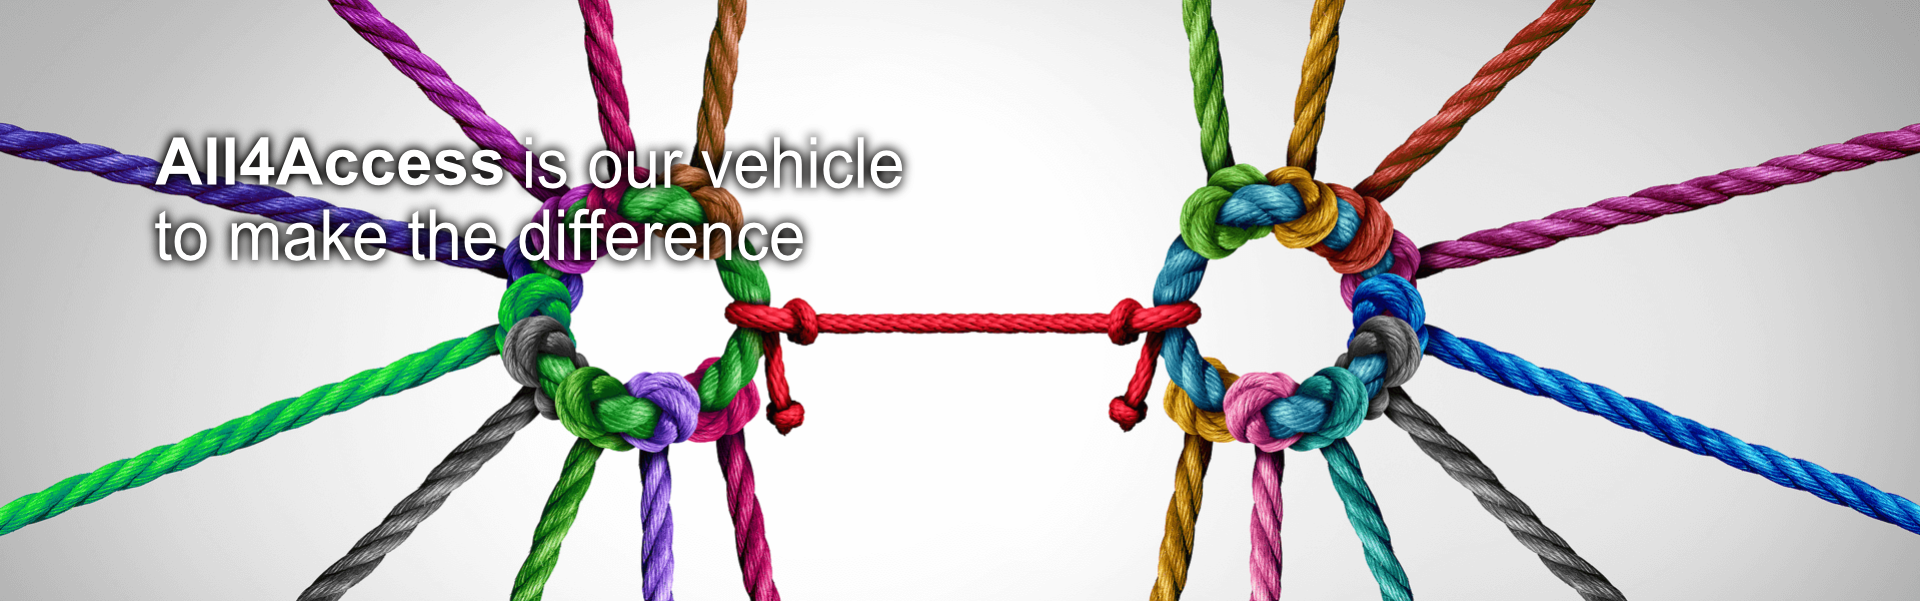 Text: All4Access is our vehicle to make the difference. Background image: Several colorful ropes bind together in a circle.